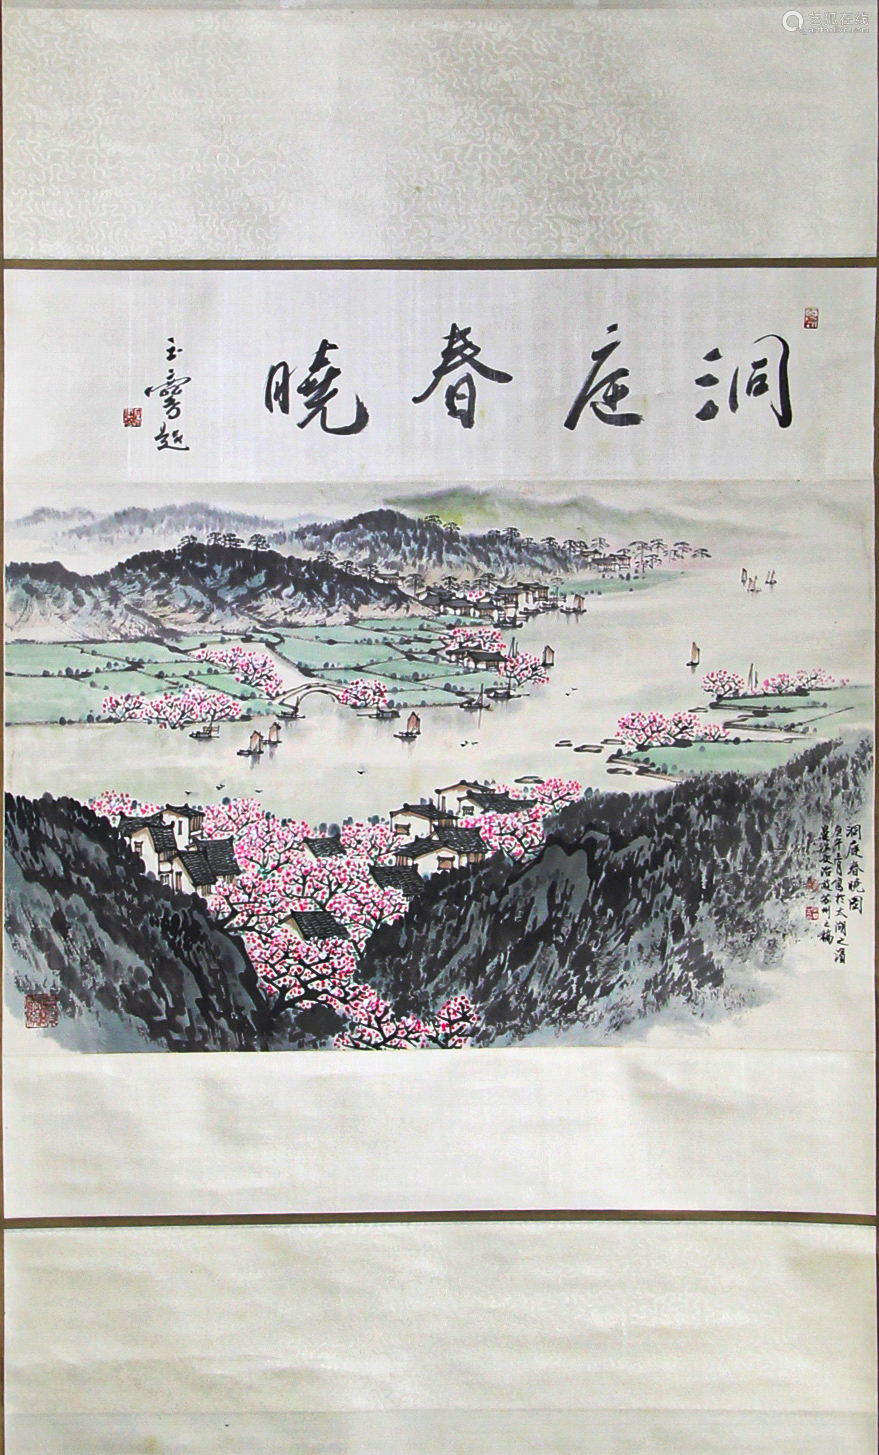 Chinese ink painting,
Song Wenzhi Landscape Painting